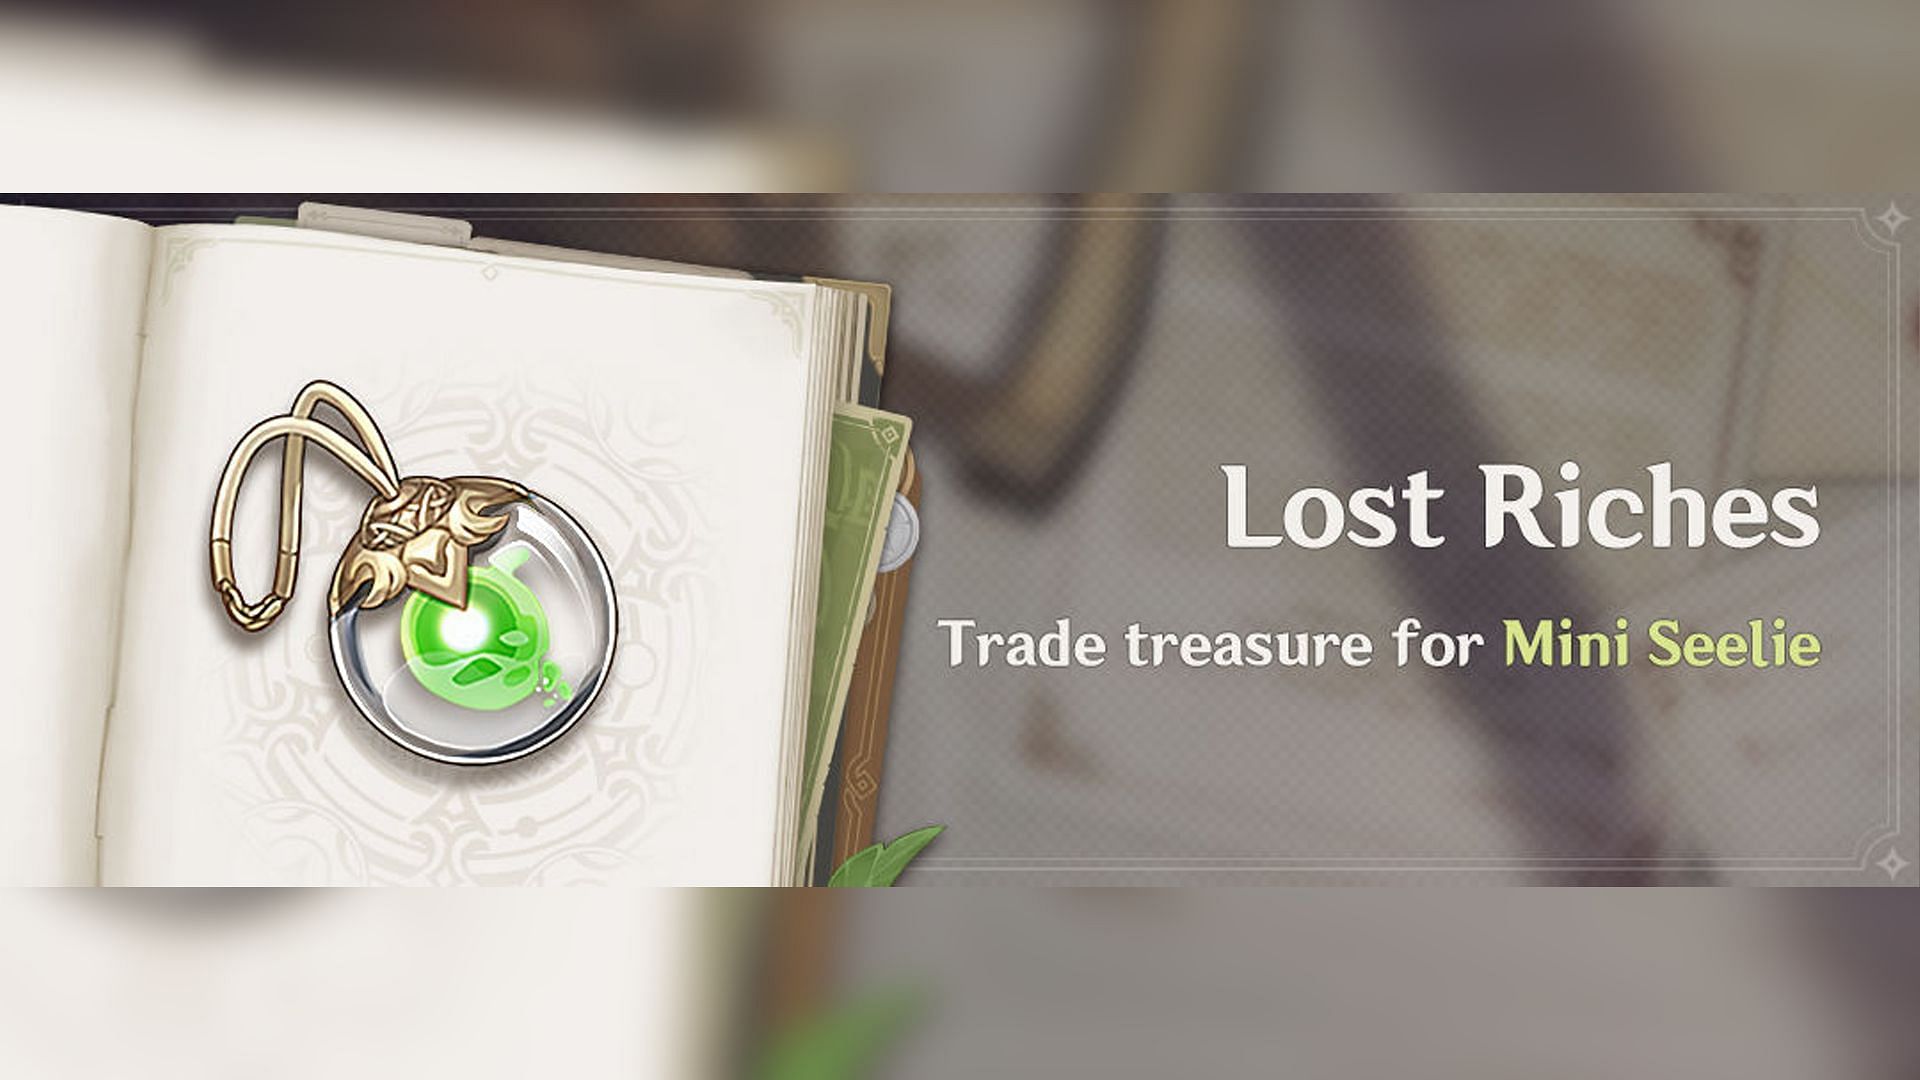 Lost Riches rerun event in version 3.0 (Image via HoYoverse)